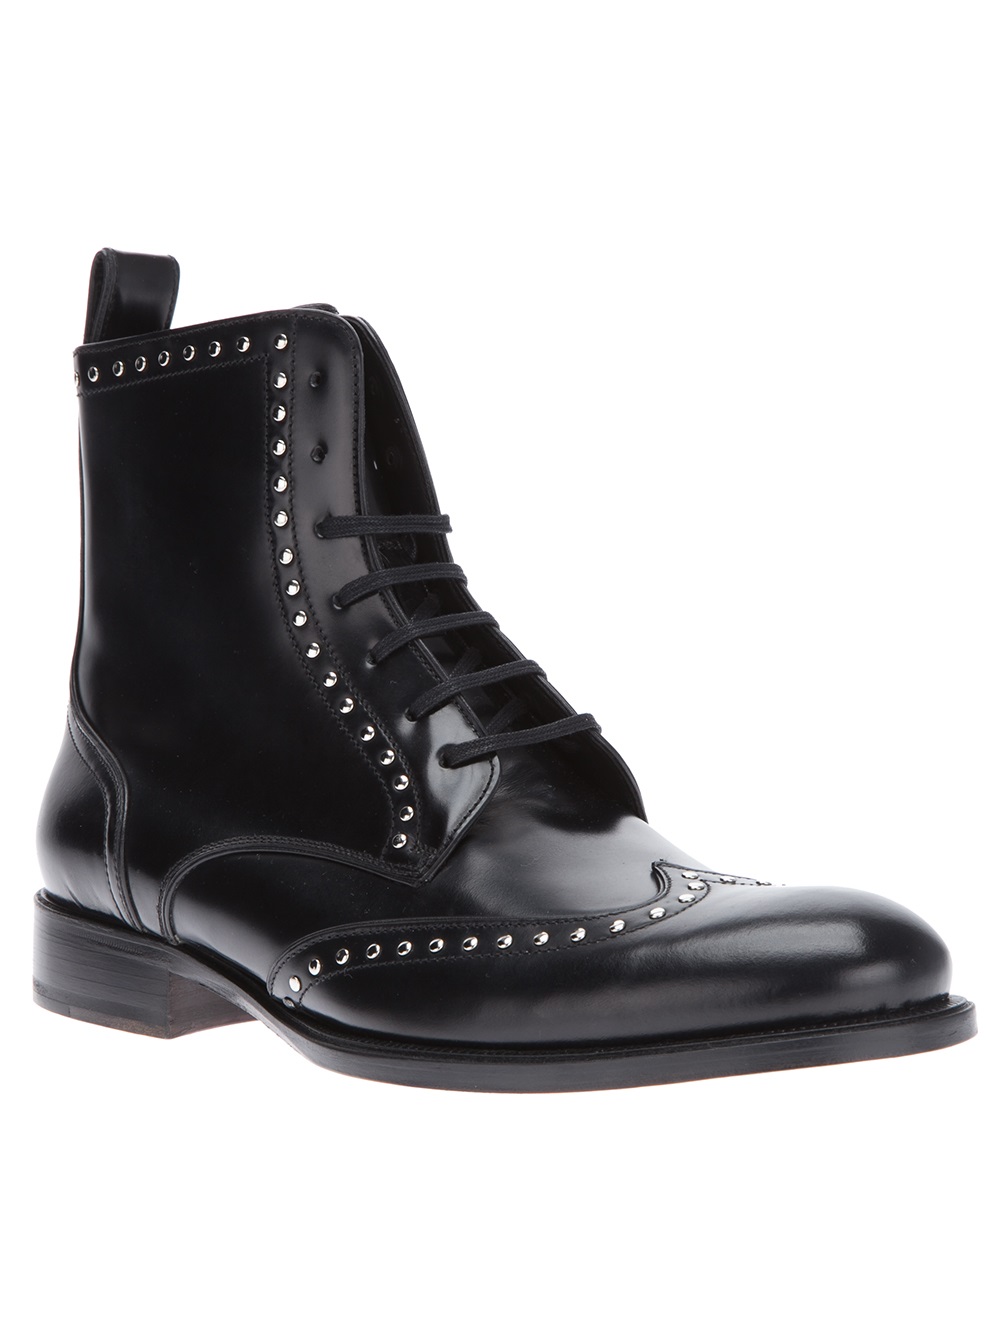 Lyst - Dsquared² Laceup Boot in Black for Men